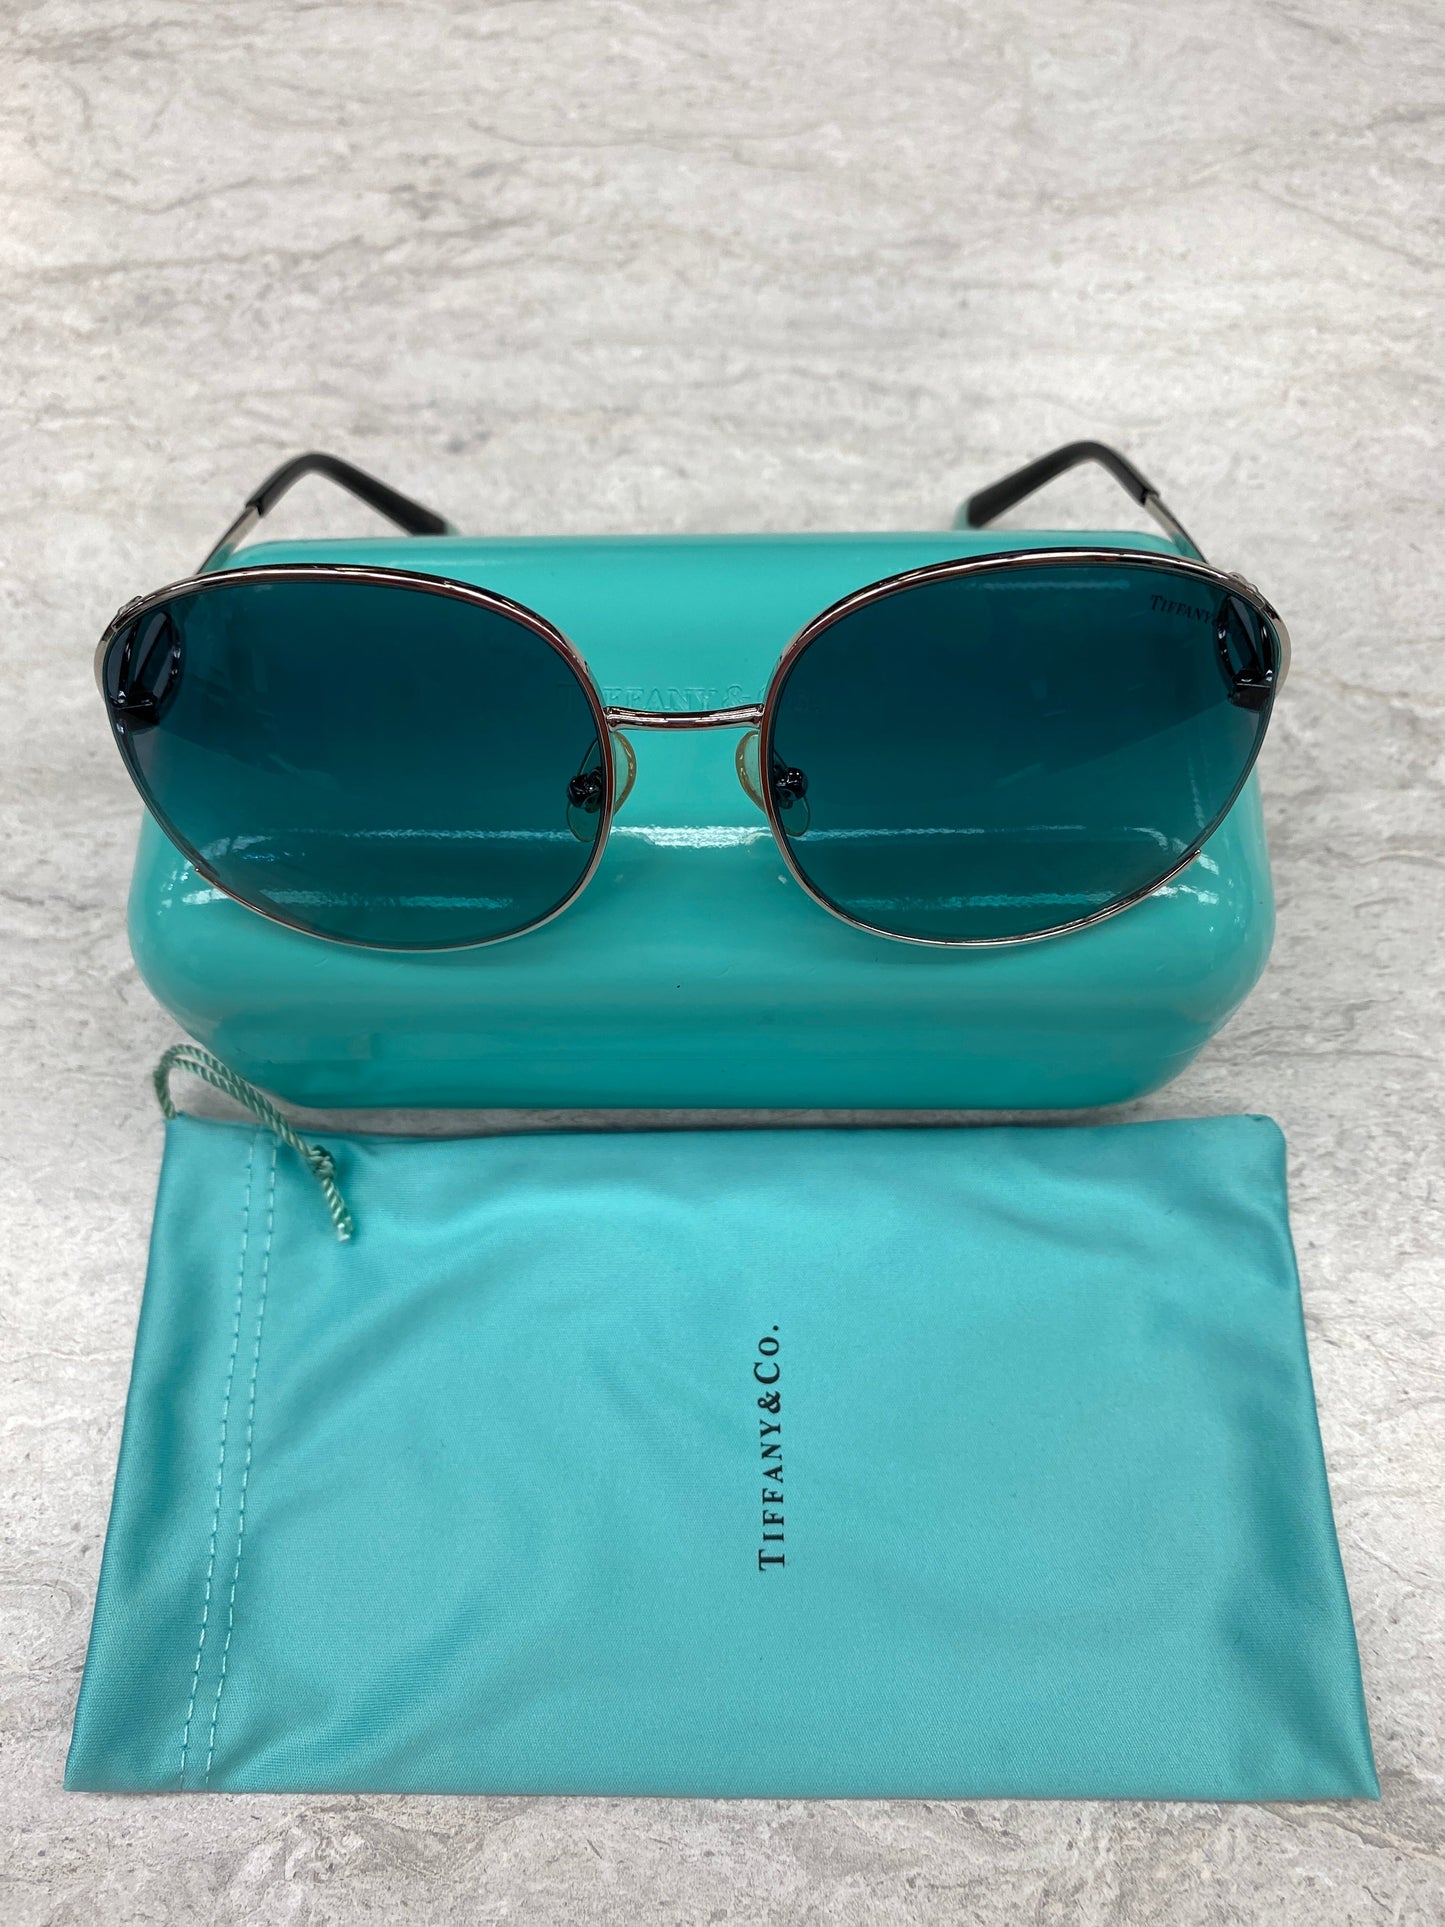 Sunglass Case Luxury Designer By Tiffany And Company